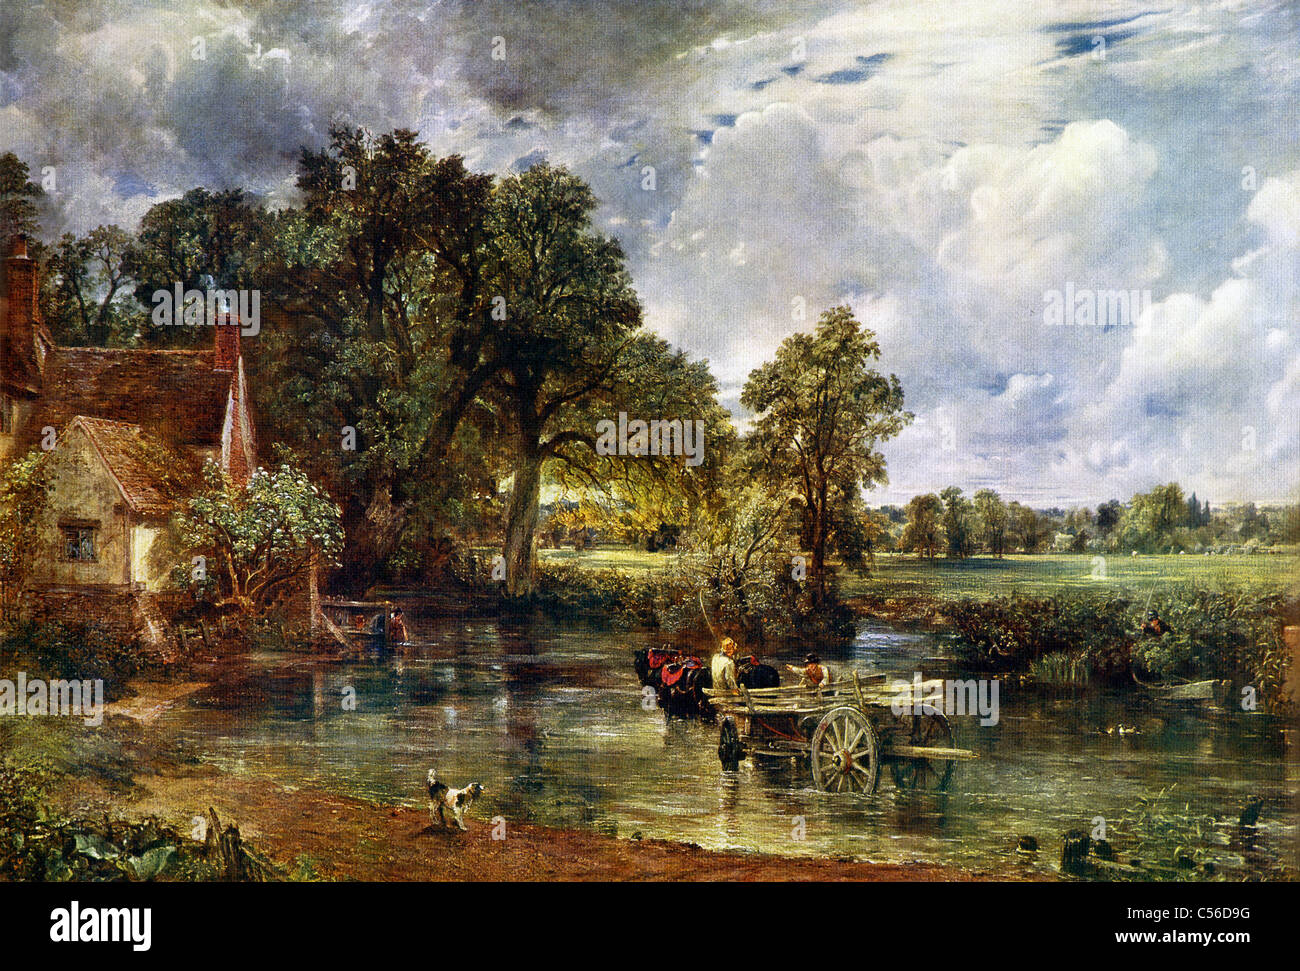 English painter John Constable (1776-1837) completed The Hay-Wain in 1821. It shows a haywain in Suffolk. Stock Photo